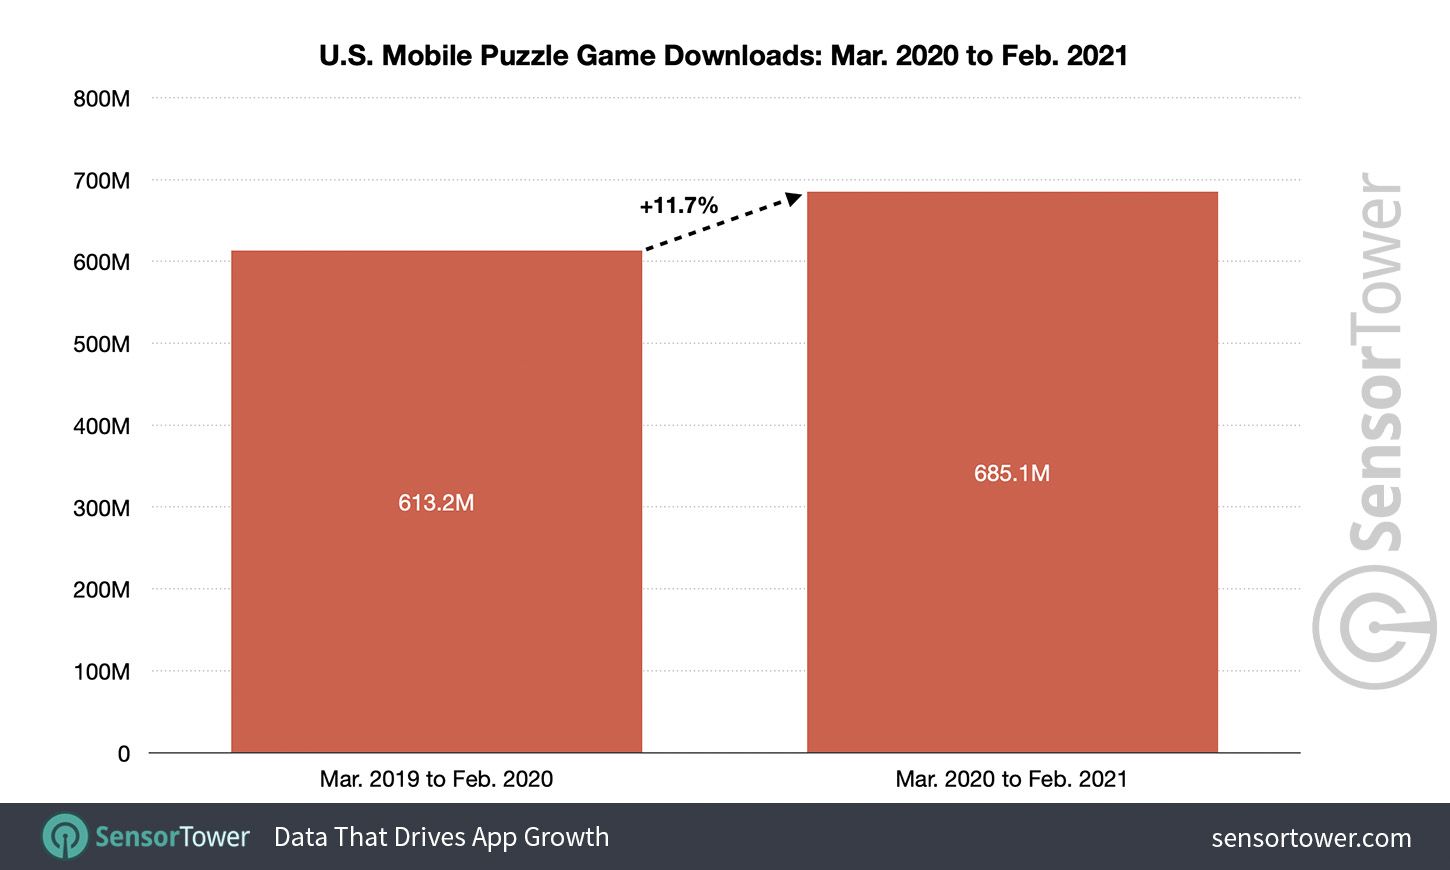 U.S. Mobile Puzzle Game Downloads: March 2020 to February 2021